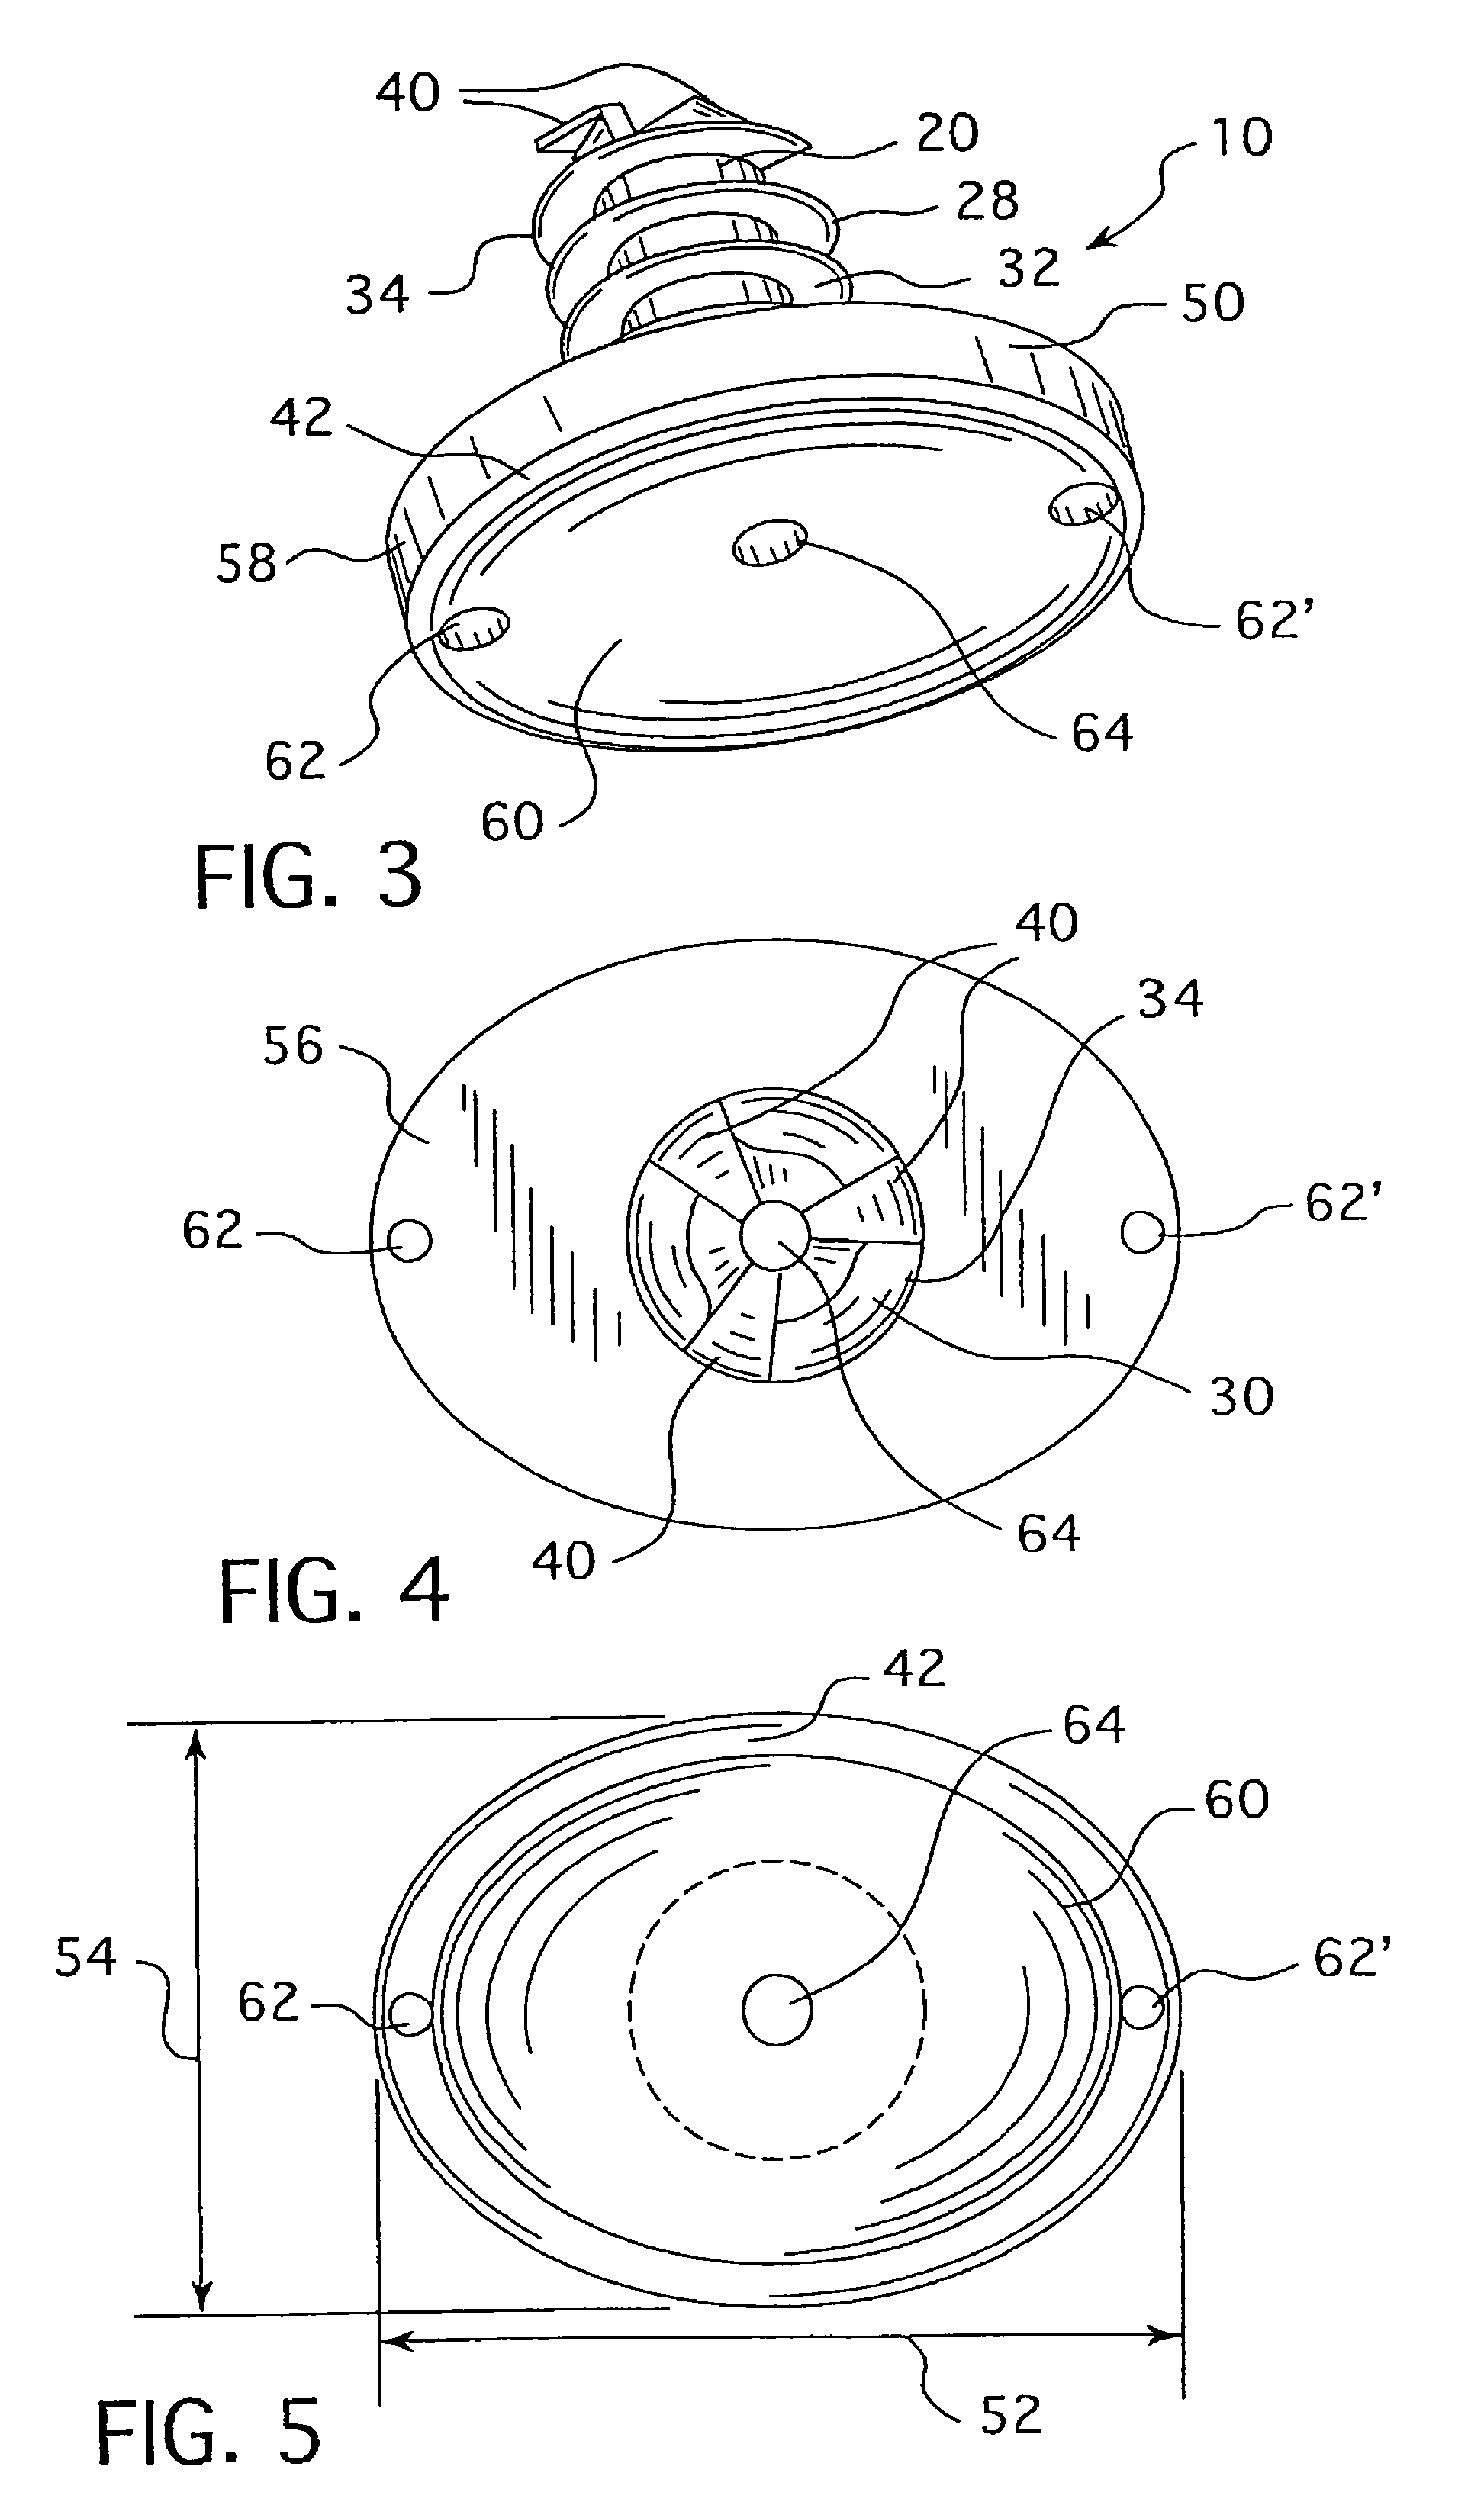 Cannulated hemi-implant and methods of use thereof